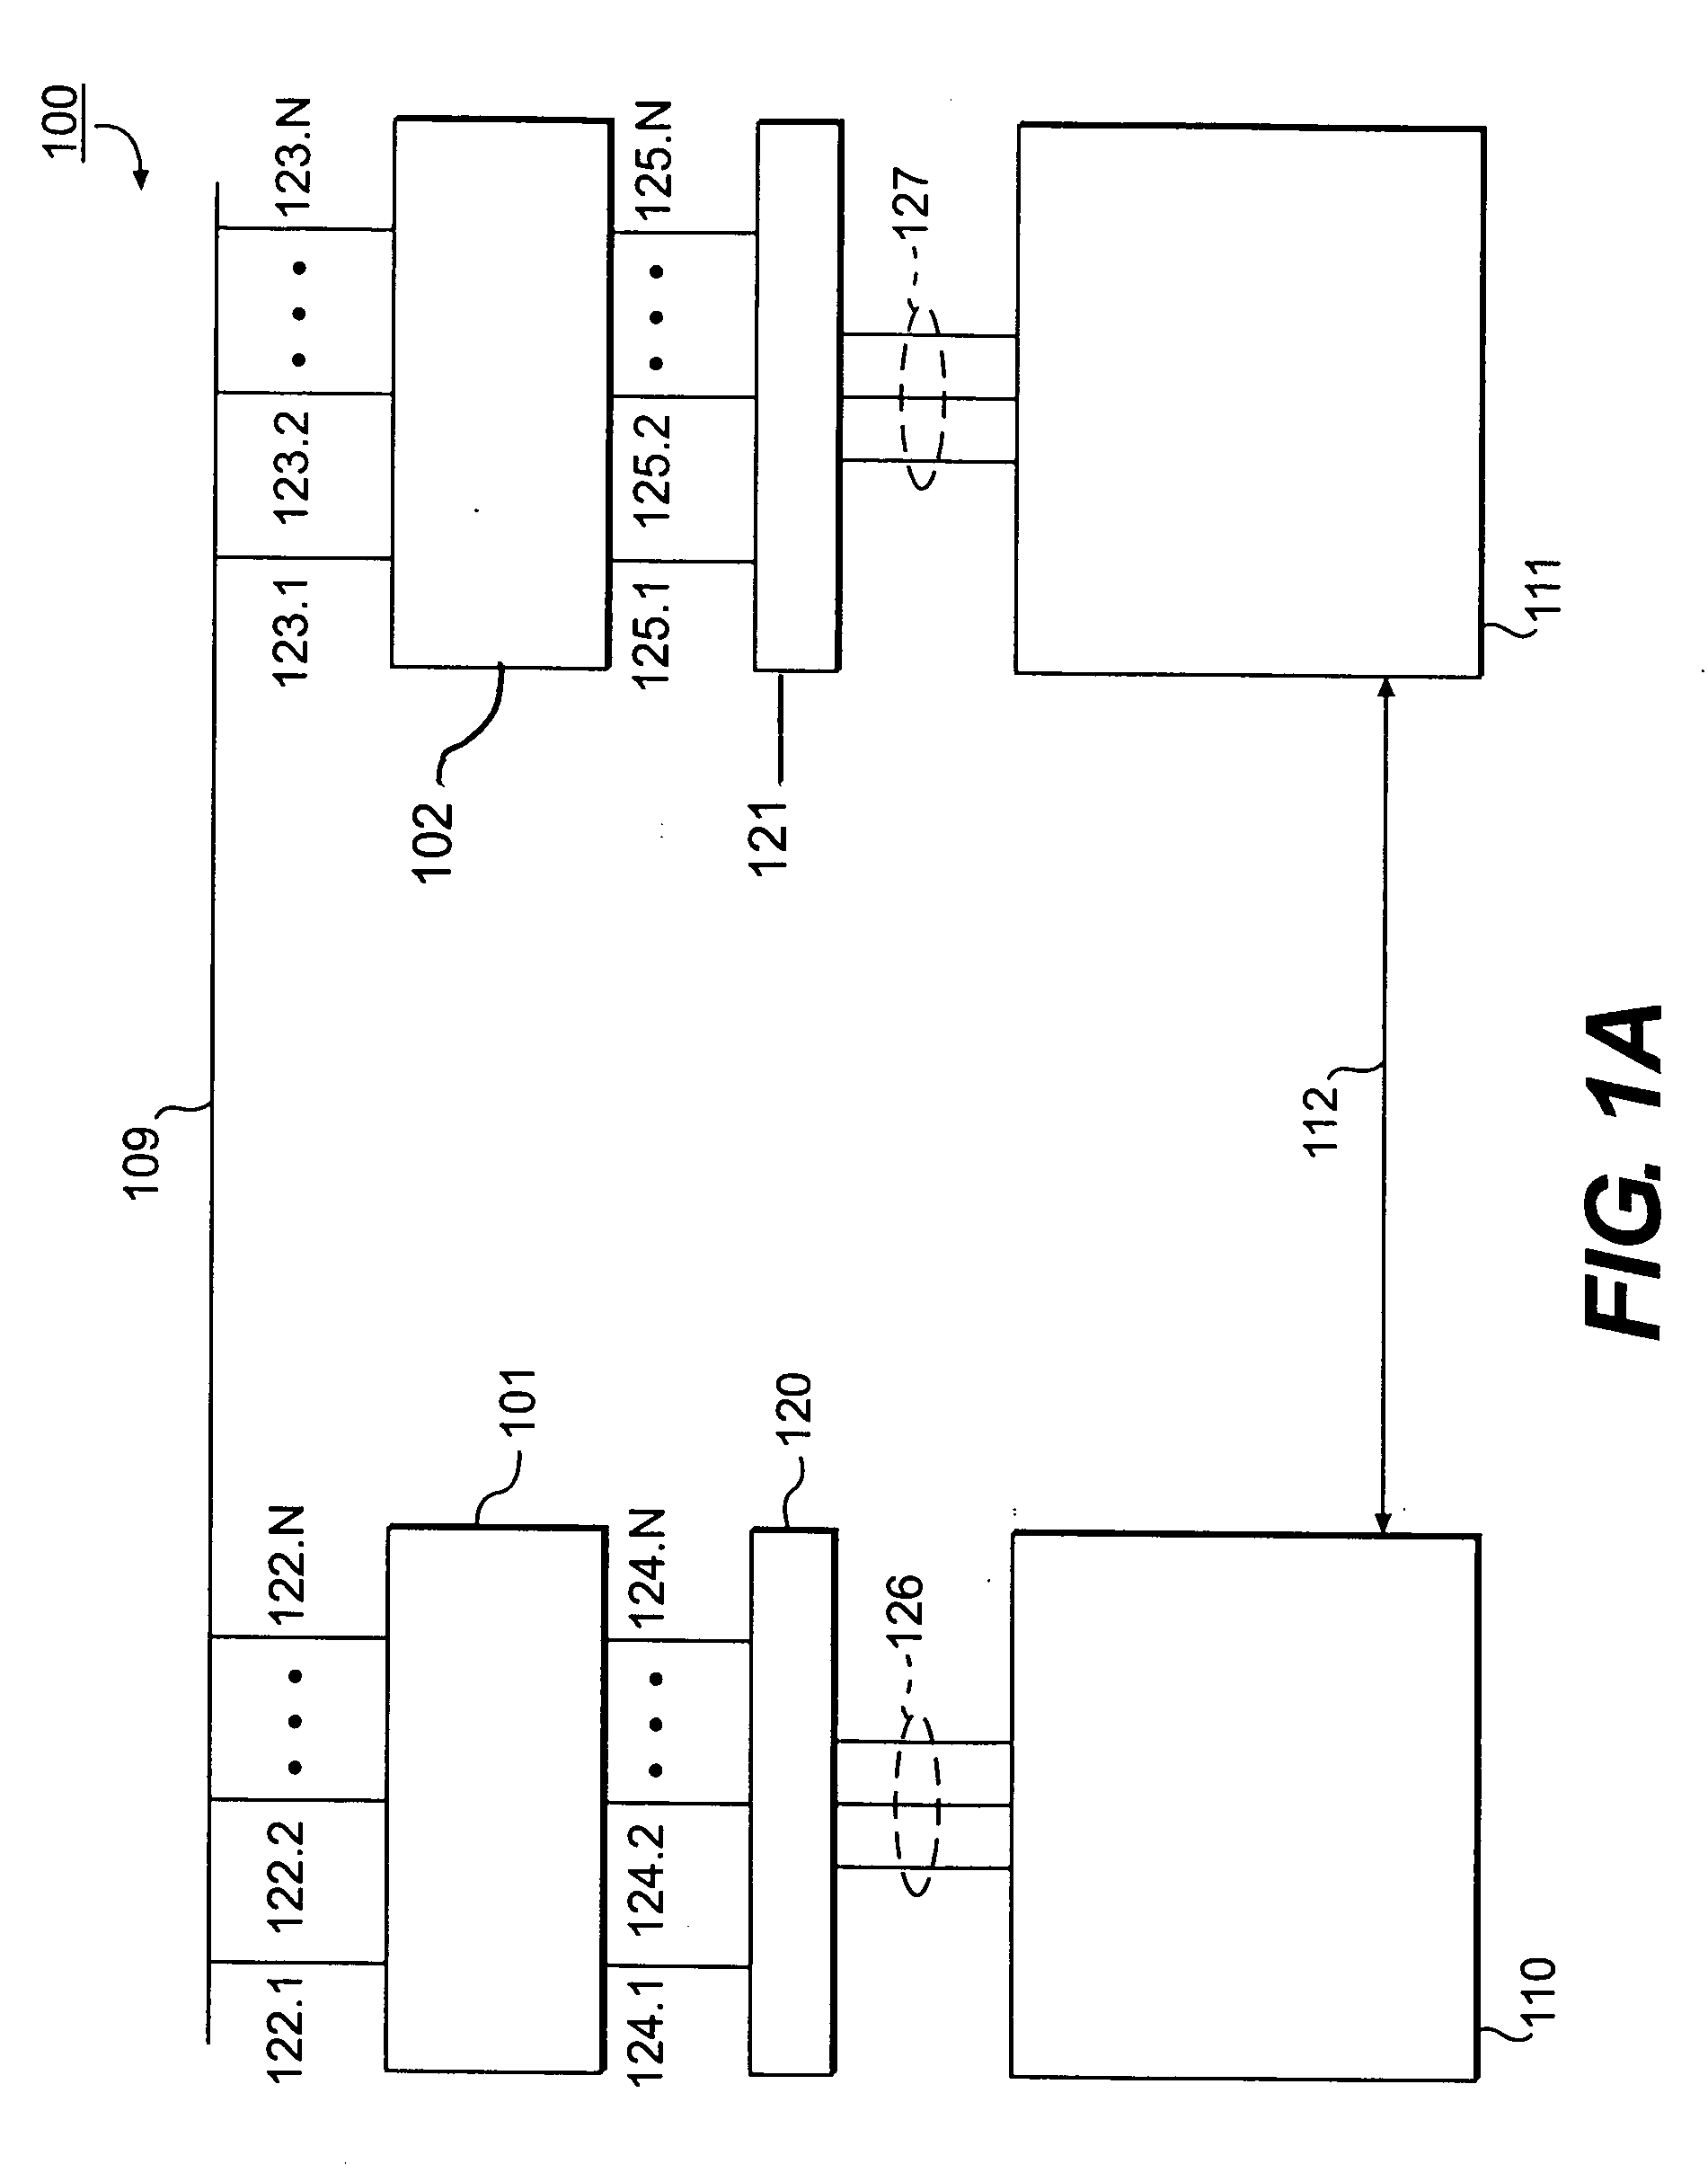 Heartbeat apparatus via remote mirroring link on multi-site and method of using same